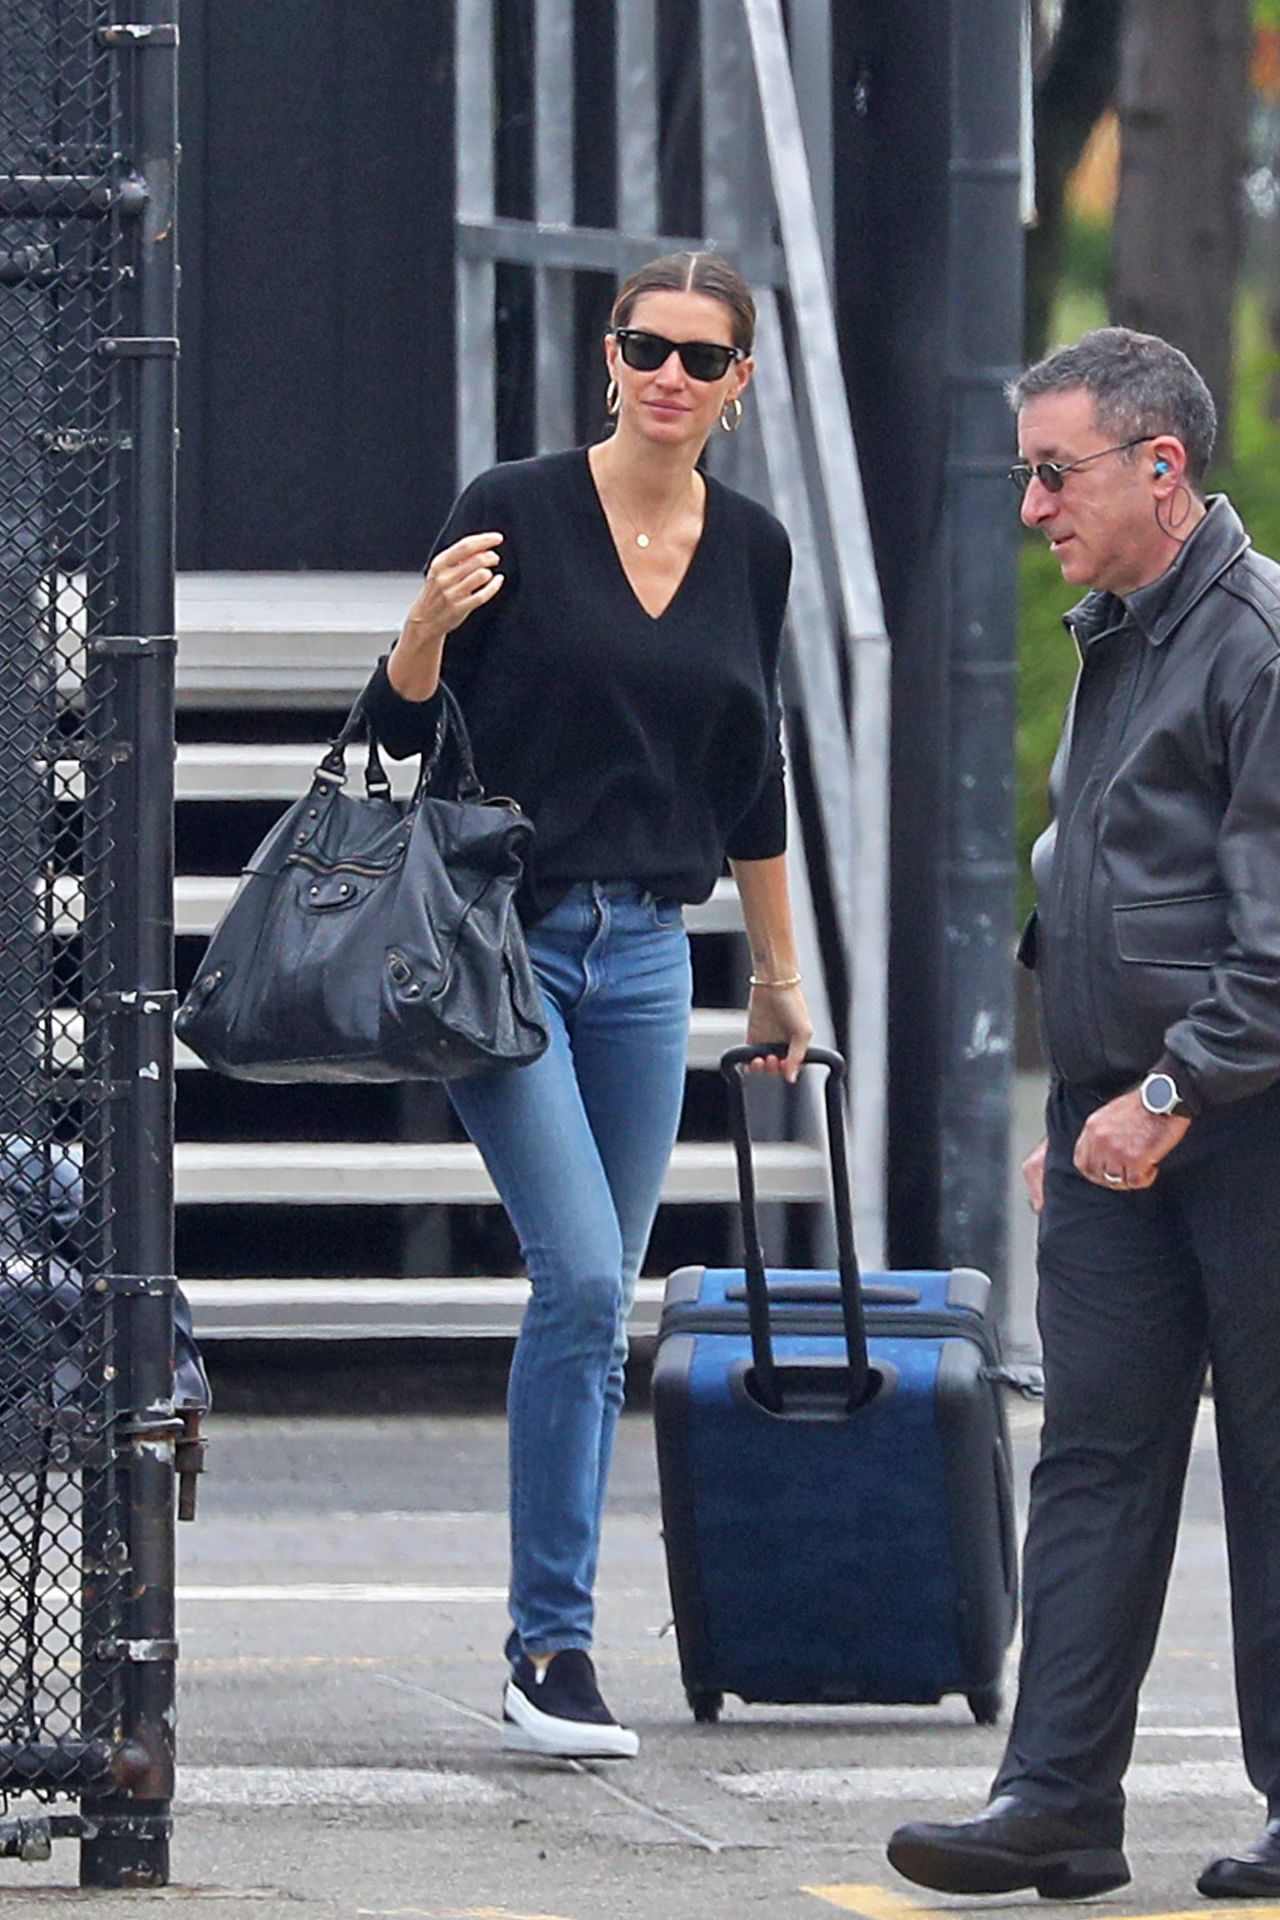 Gisele Bundchen and Tom Brady - Catch a Helicopter Out of NYC 05/07/20191280 x 1920